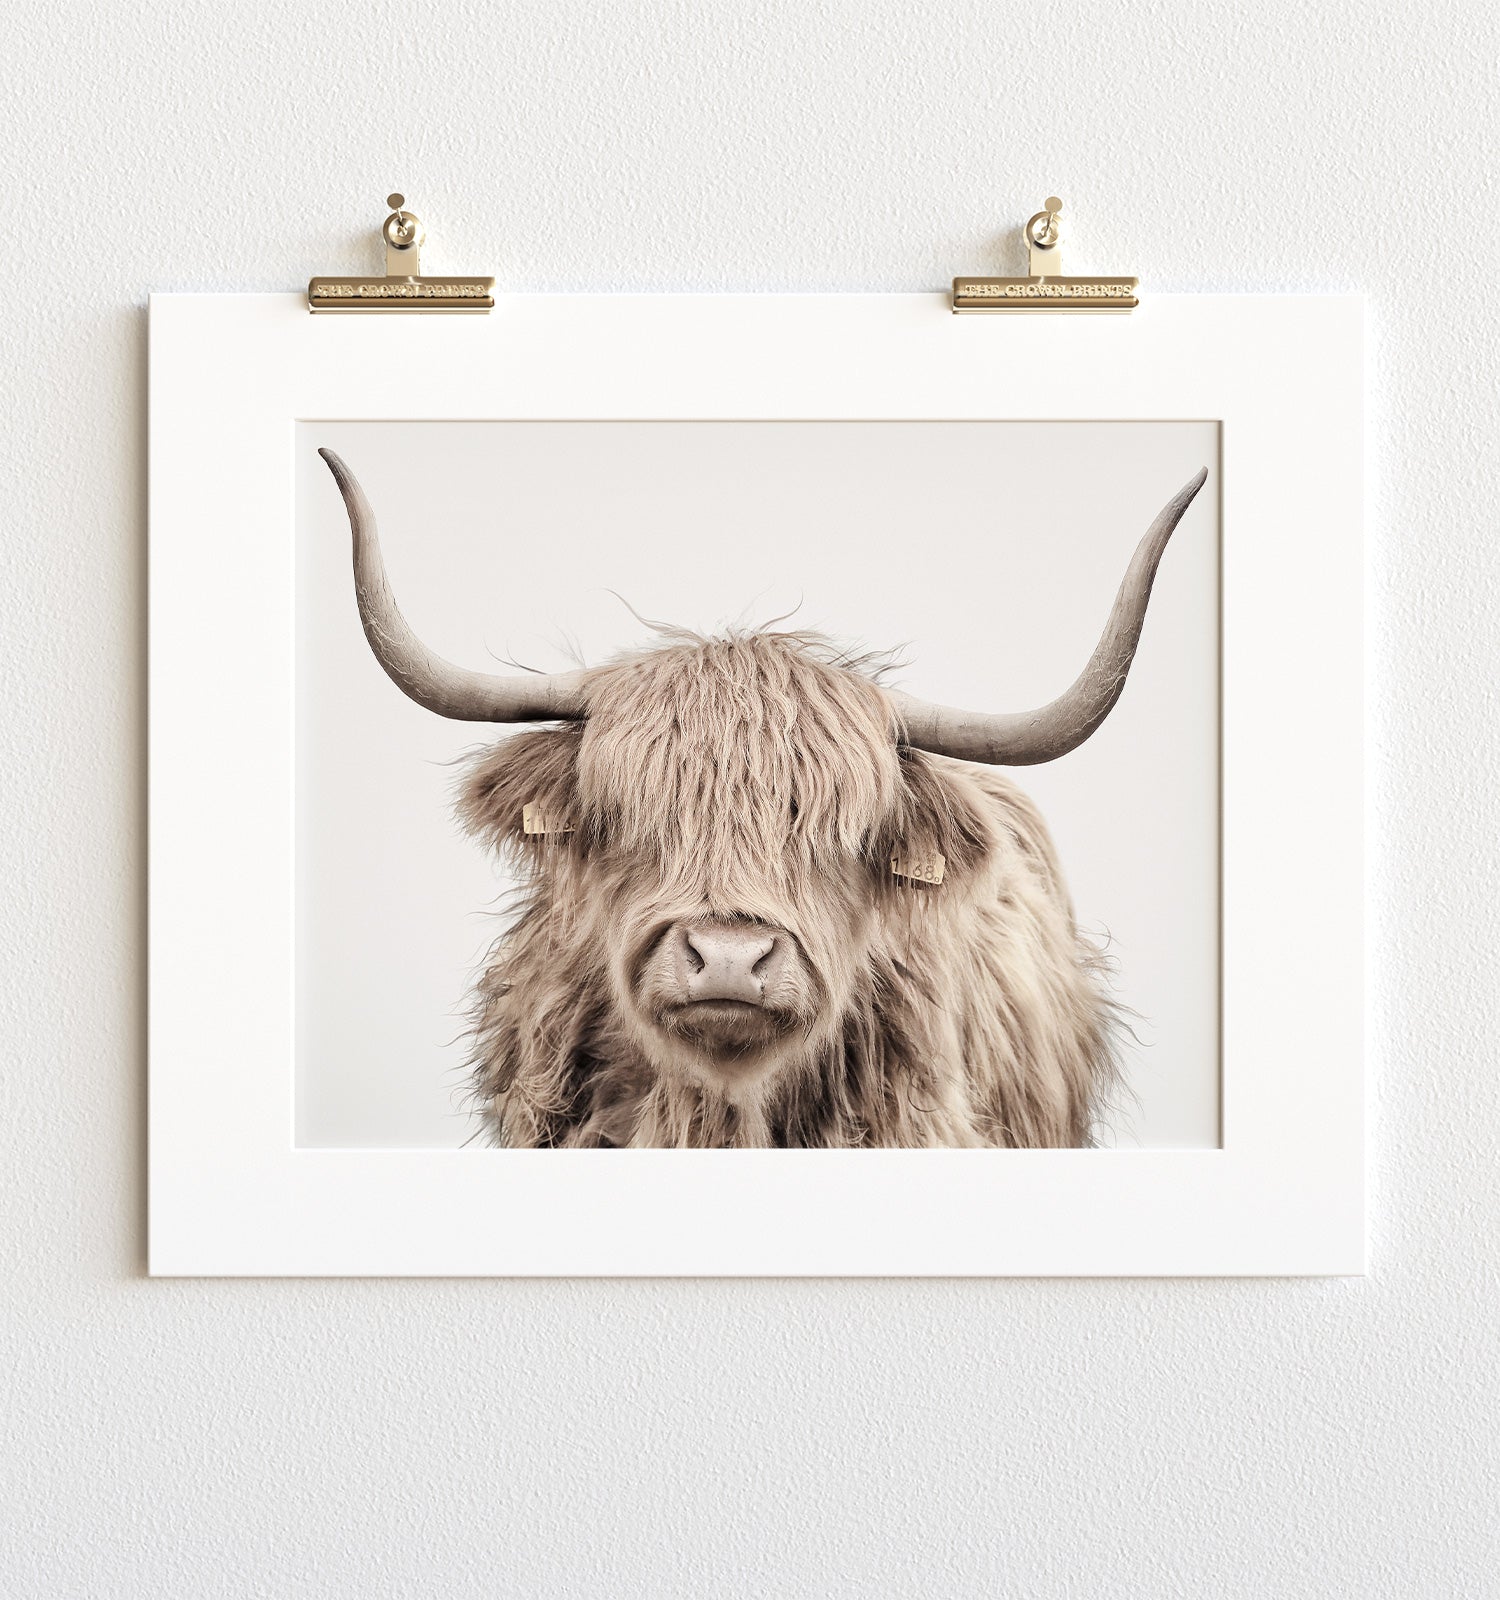 HIGHLAND COW wallpaper by Bigtopdog13  Download on ZEDGE  08de